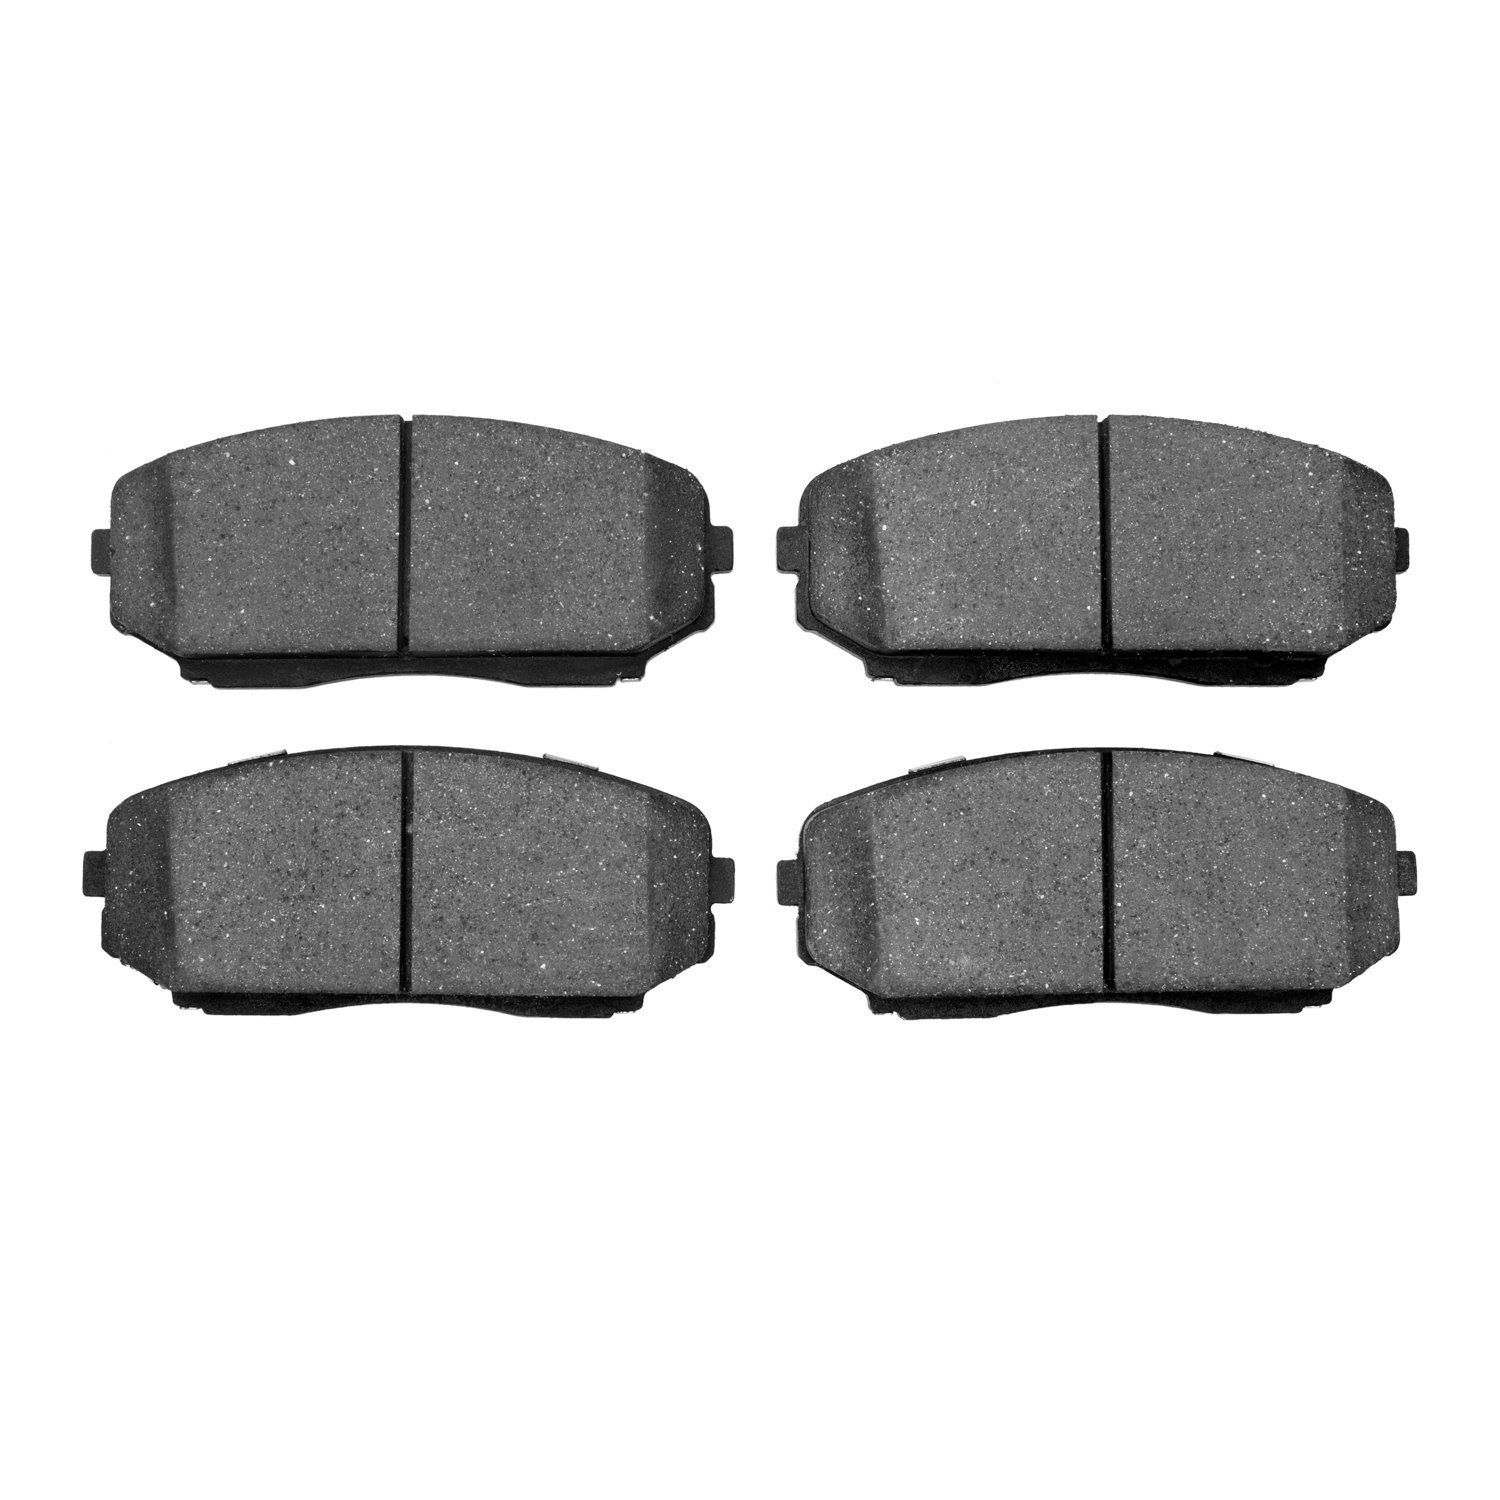 1310-1258-00 3000-Series Ceramic Brake Pads, Fits Select Multiple Makes/Models, Position: Front